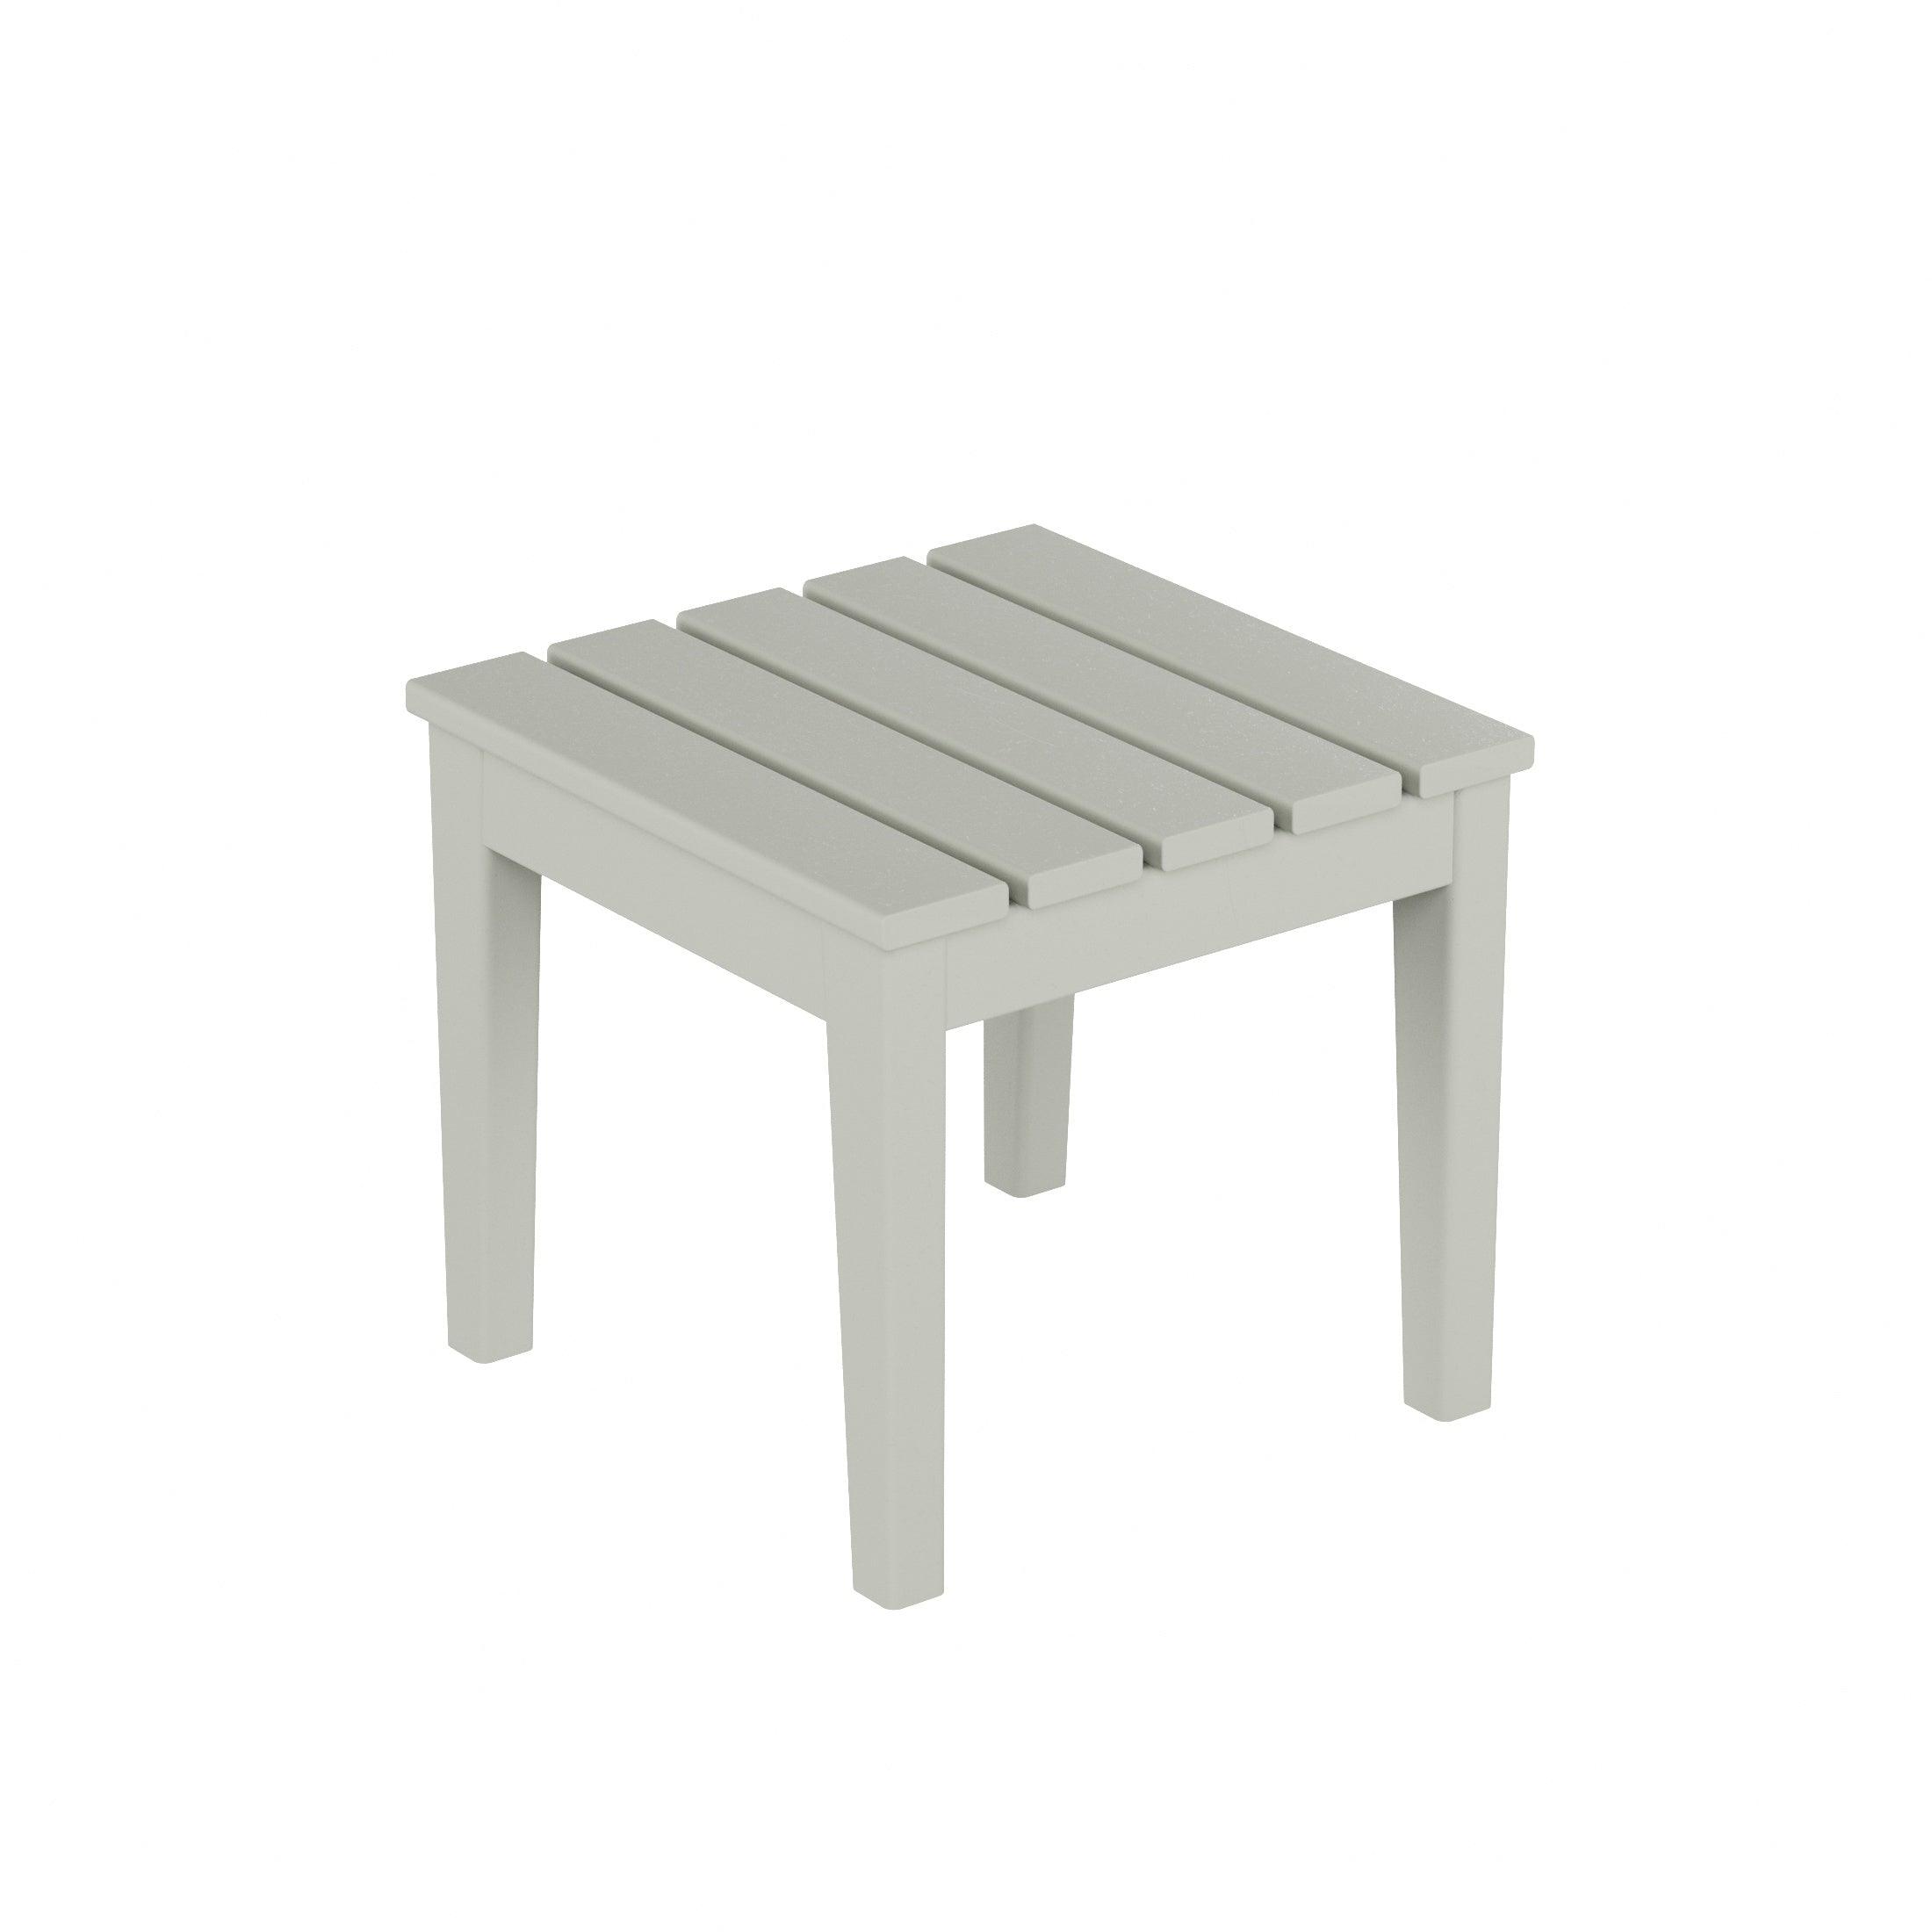 Palms Modern Adirondack Square Outdoor Side Table - Costaelm